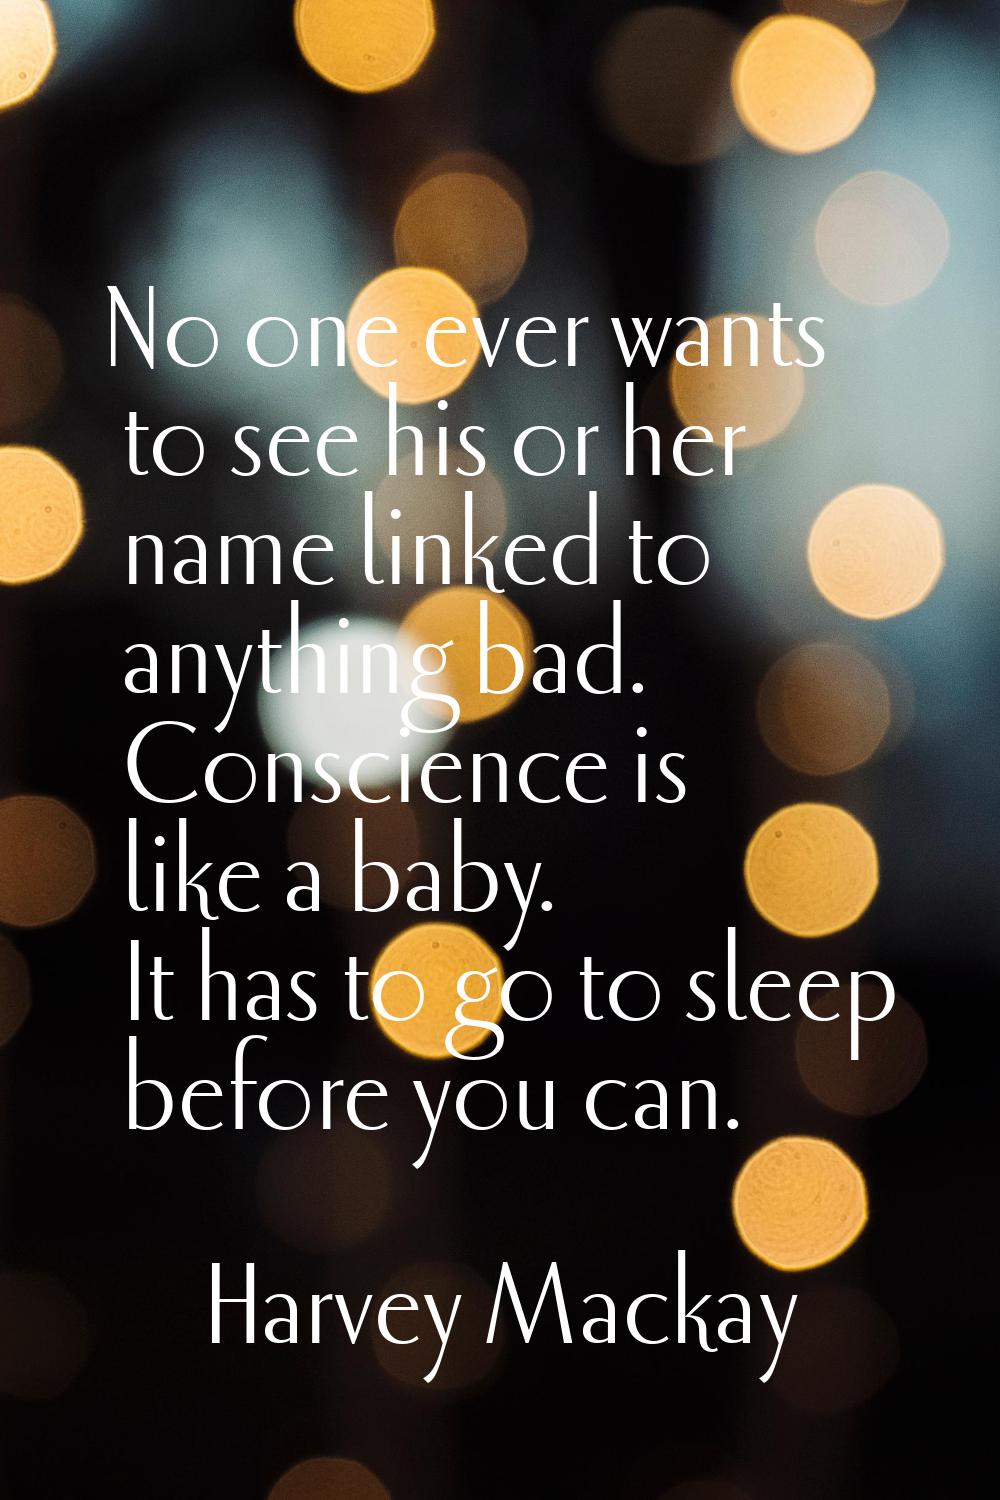 No one ever wants to see his or her name linked to anything bad. Conscience is like a baby. It has 